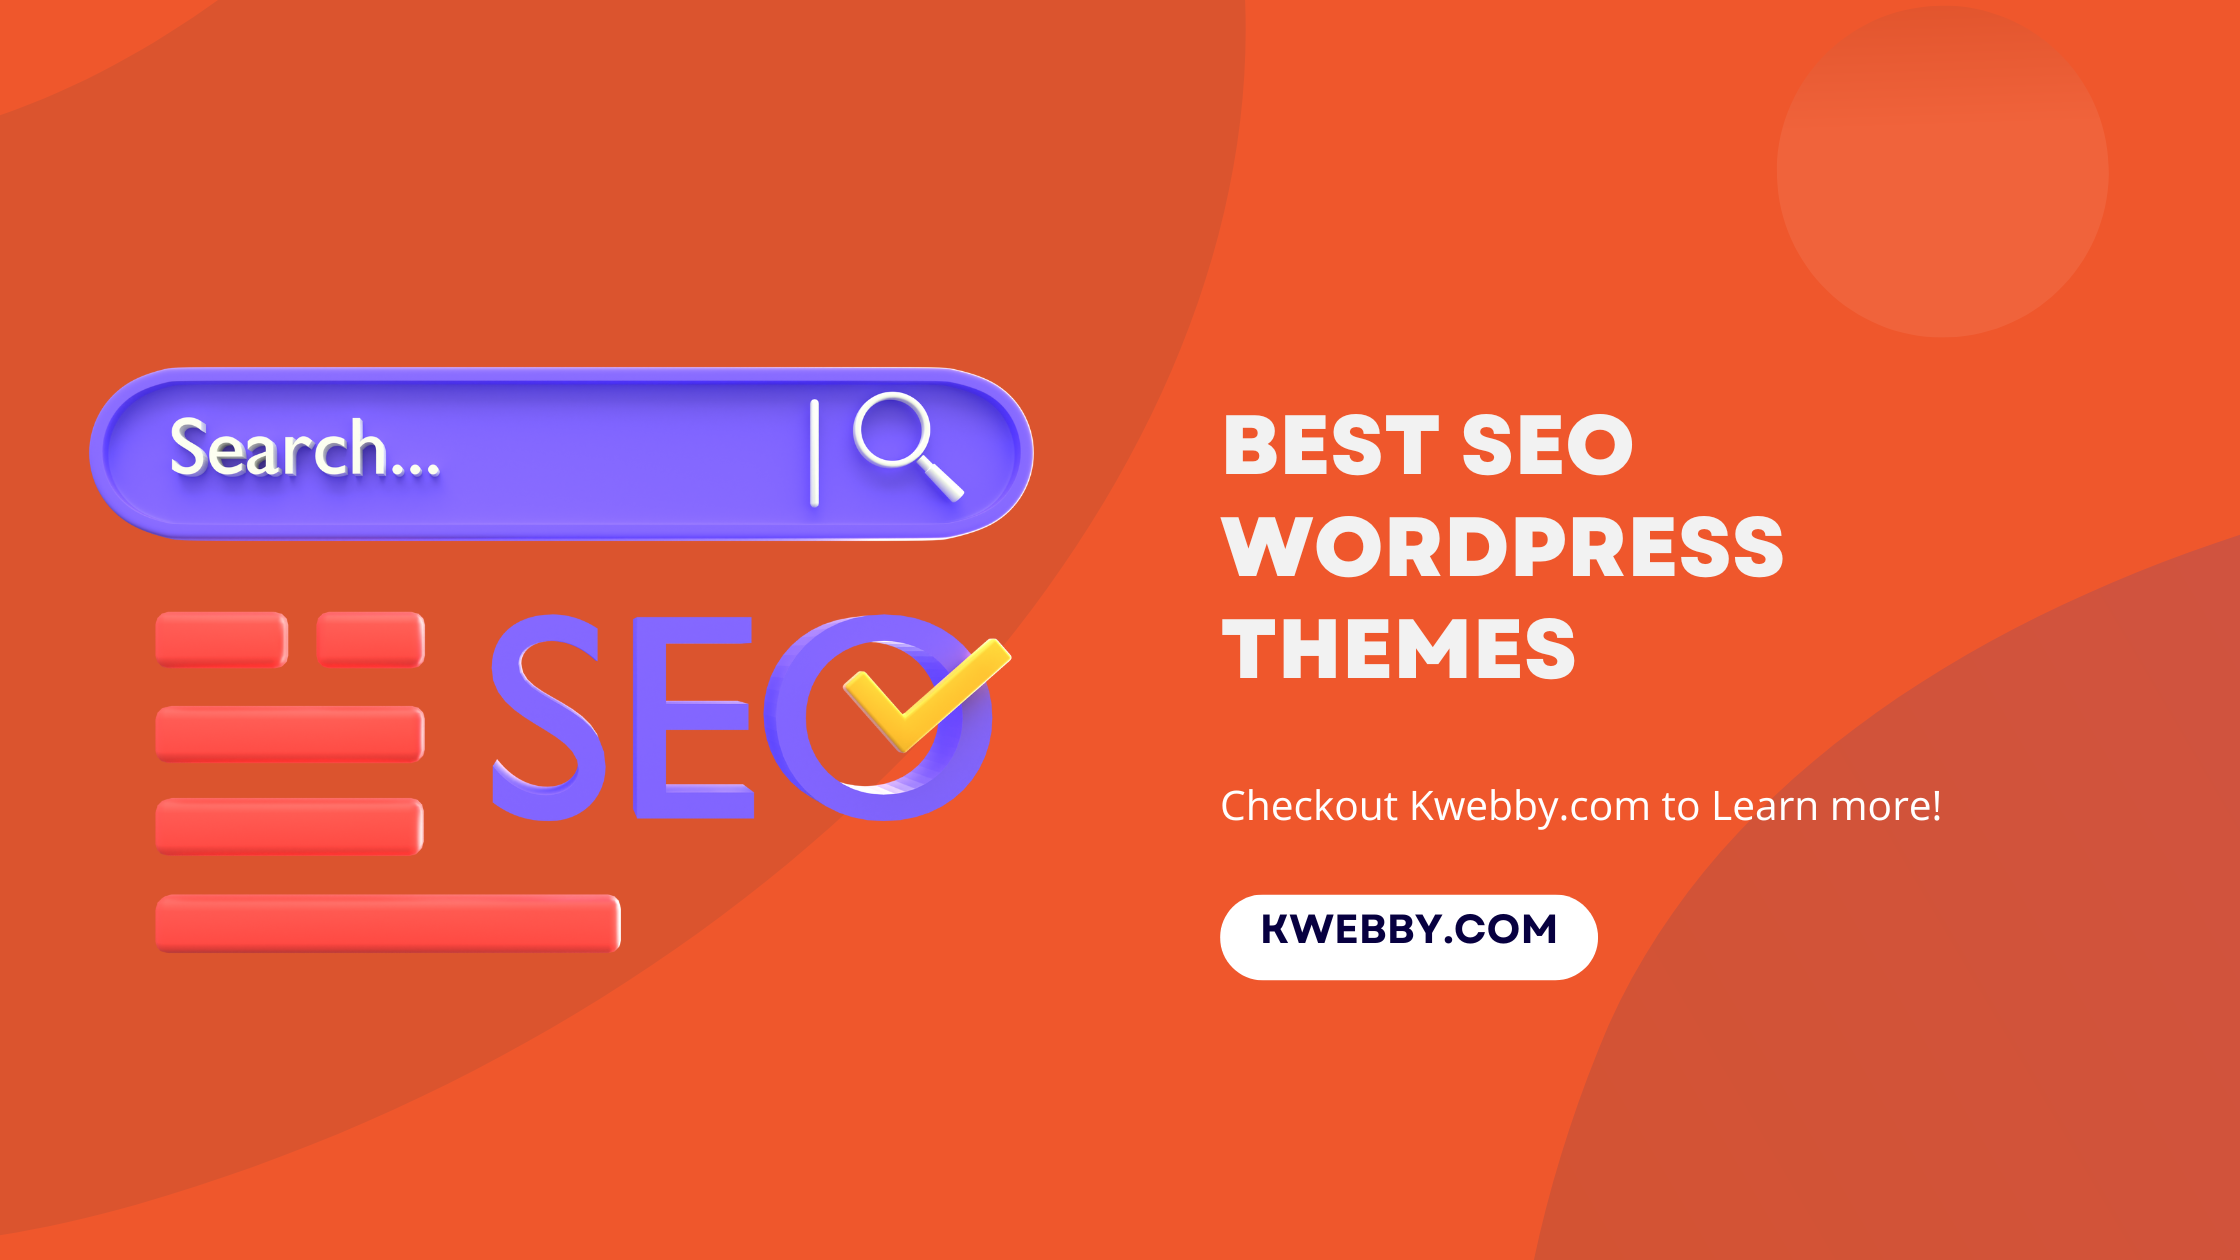 7 Best SEO WordPress Themes for Your SEO Agency